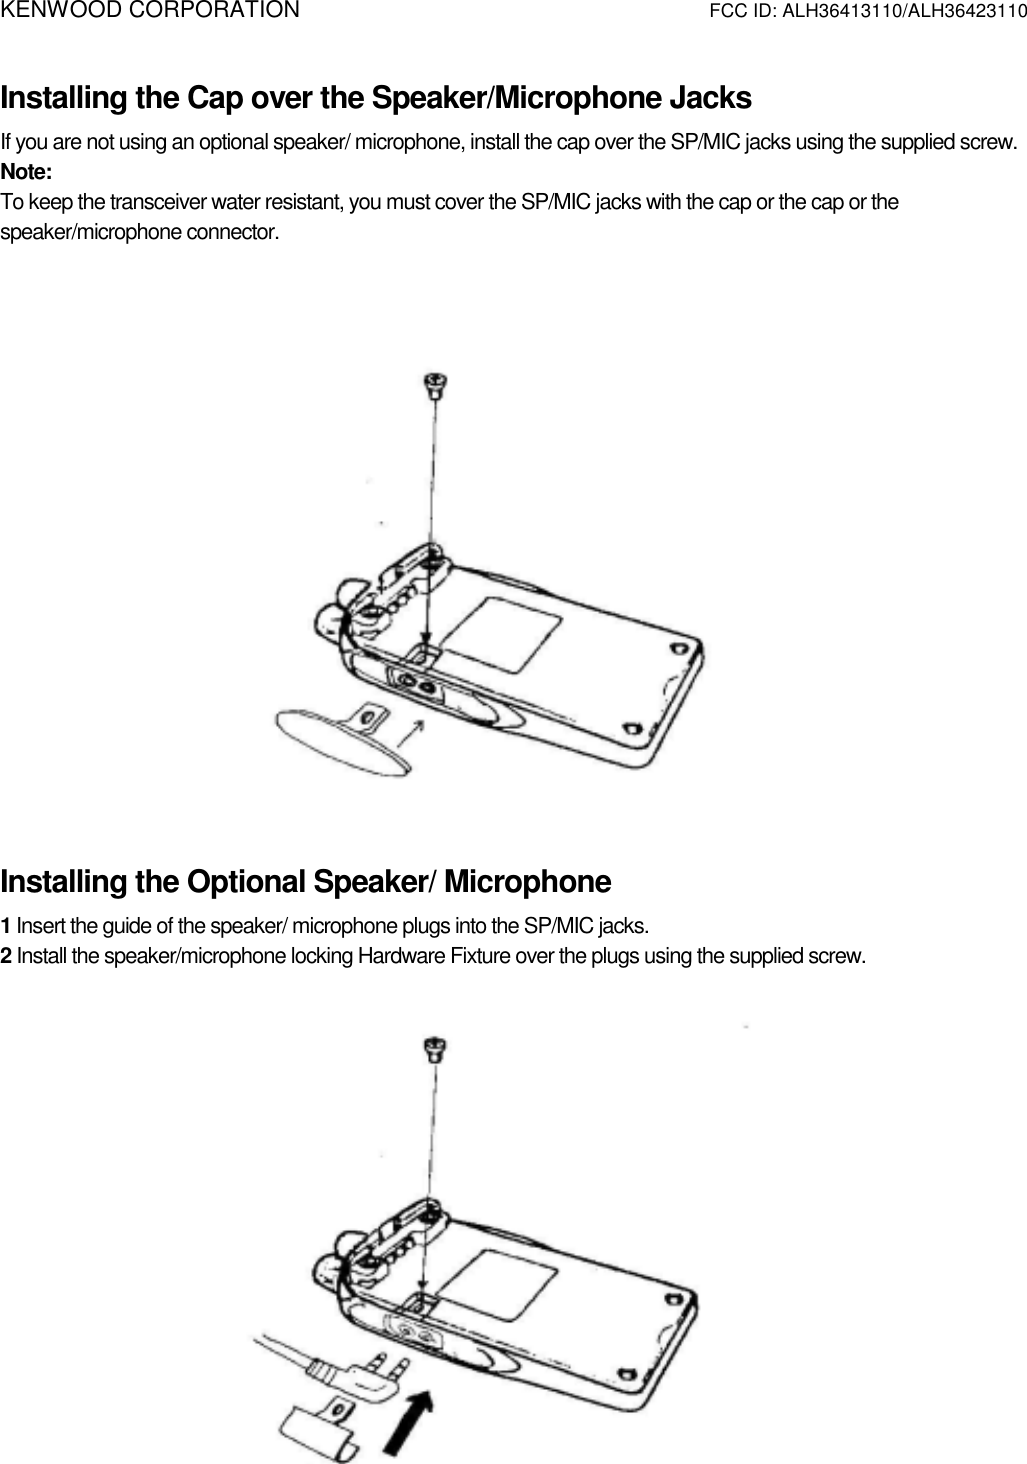 KENWOOD CORPORATION          FCC ID: ALH36413110/ALH36423110   Installing the Cap over the Speaker/Microphone Jacks If you are not using an optional speaker/ microphone, install the cap over the SP/MIC jacks using the supplied screw. Note:  To keep the transceiver water resistant, you must cover the SP/MIC jacks with the cap or the cap or the speaker/microphone connector.     Installing the Optional Speaker/ Microphone 1 Insert the guide of the speaker/ microphone plugs into the SP/MIC jacks. 2 Install the speaker/microphone locking Hardware Fixture over the plugs using the supplied screw.                                                                                                                     